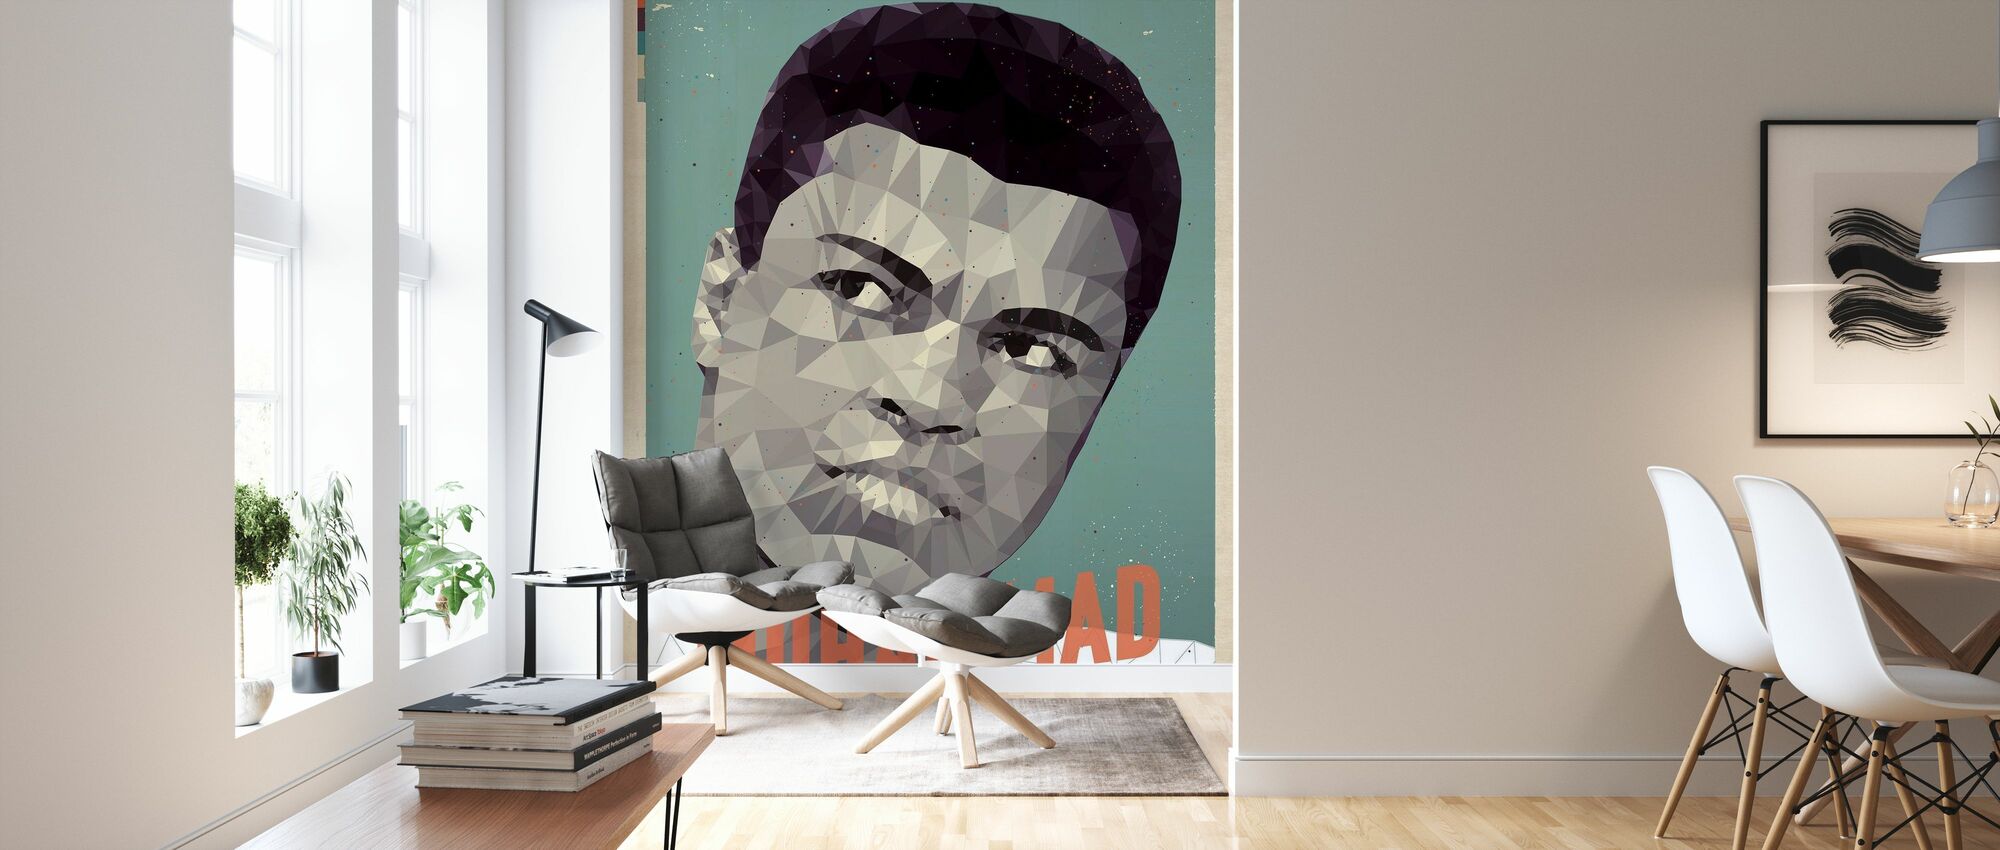 Float Like a Butterfly - Sting Like a Bee – decorate with a wall mural –  Photowall